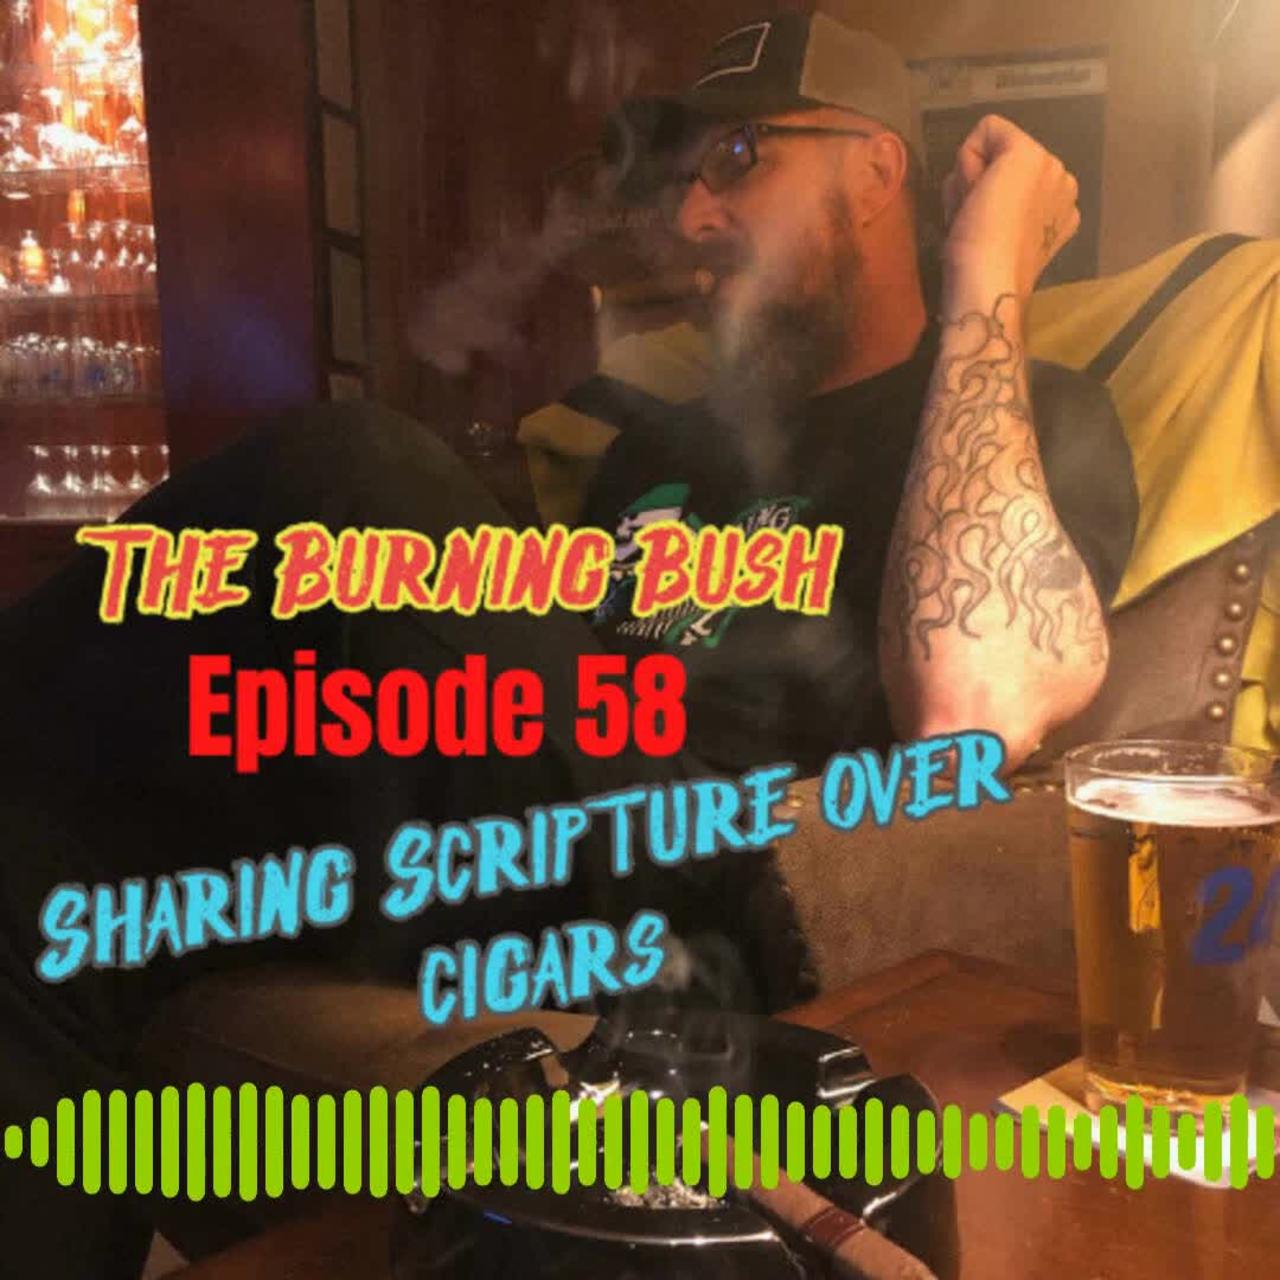 Episode 58 of The Burning Bush Podcast is live!